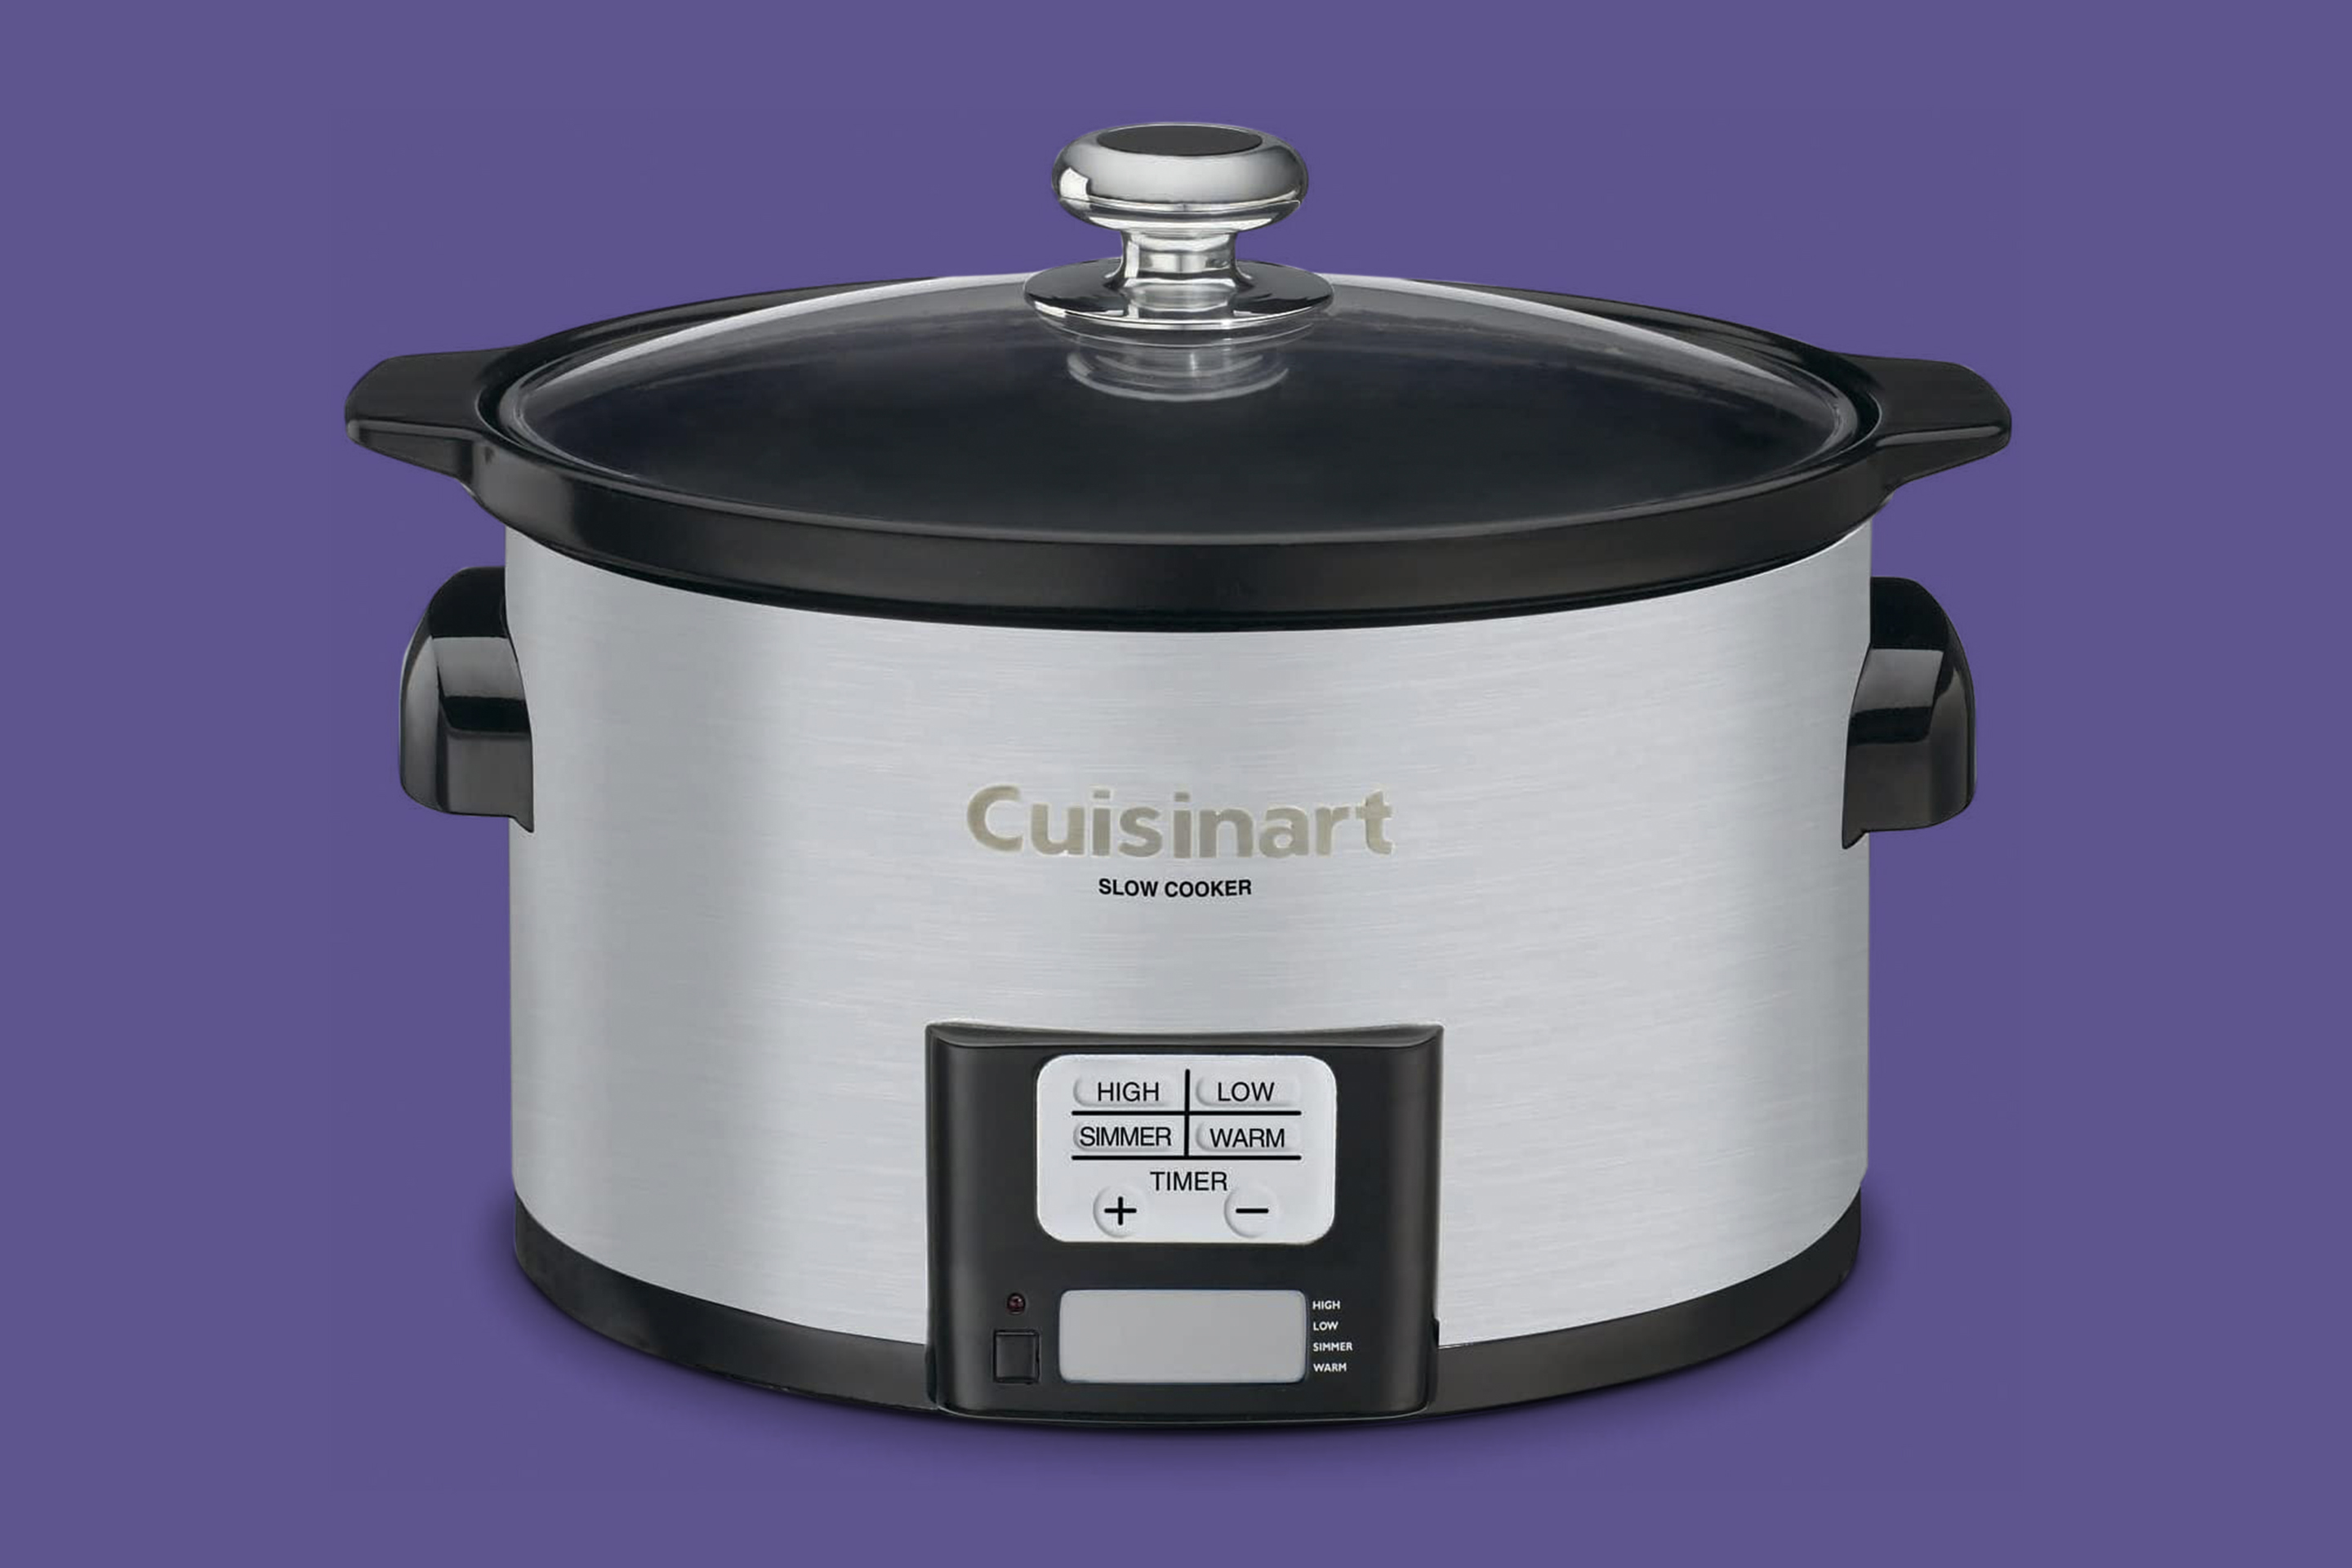 The Best Slow Cookers for Your Money